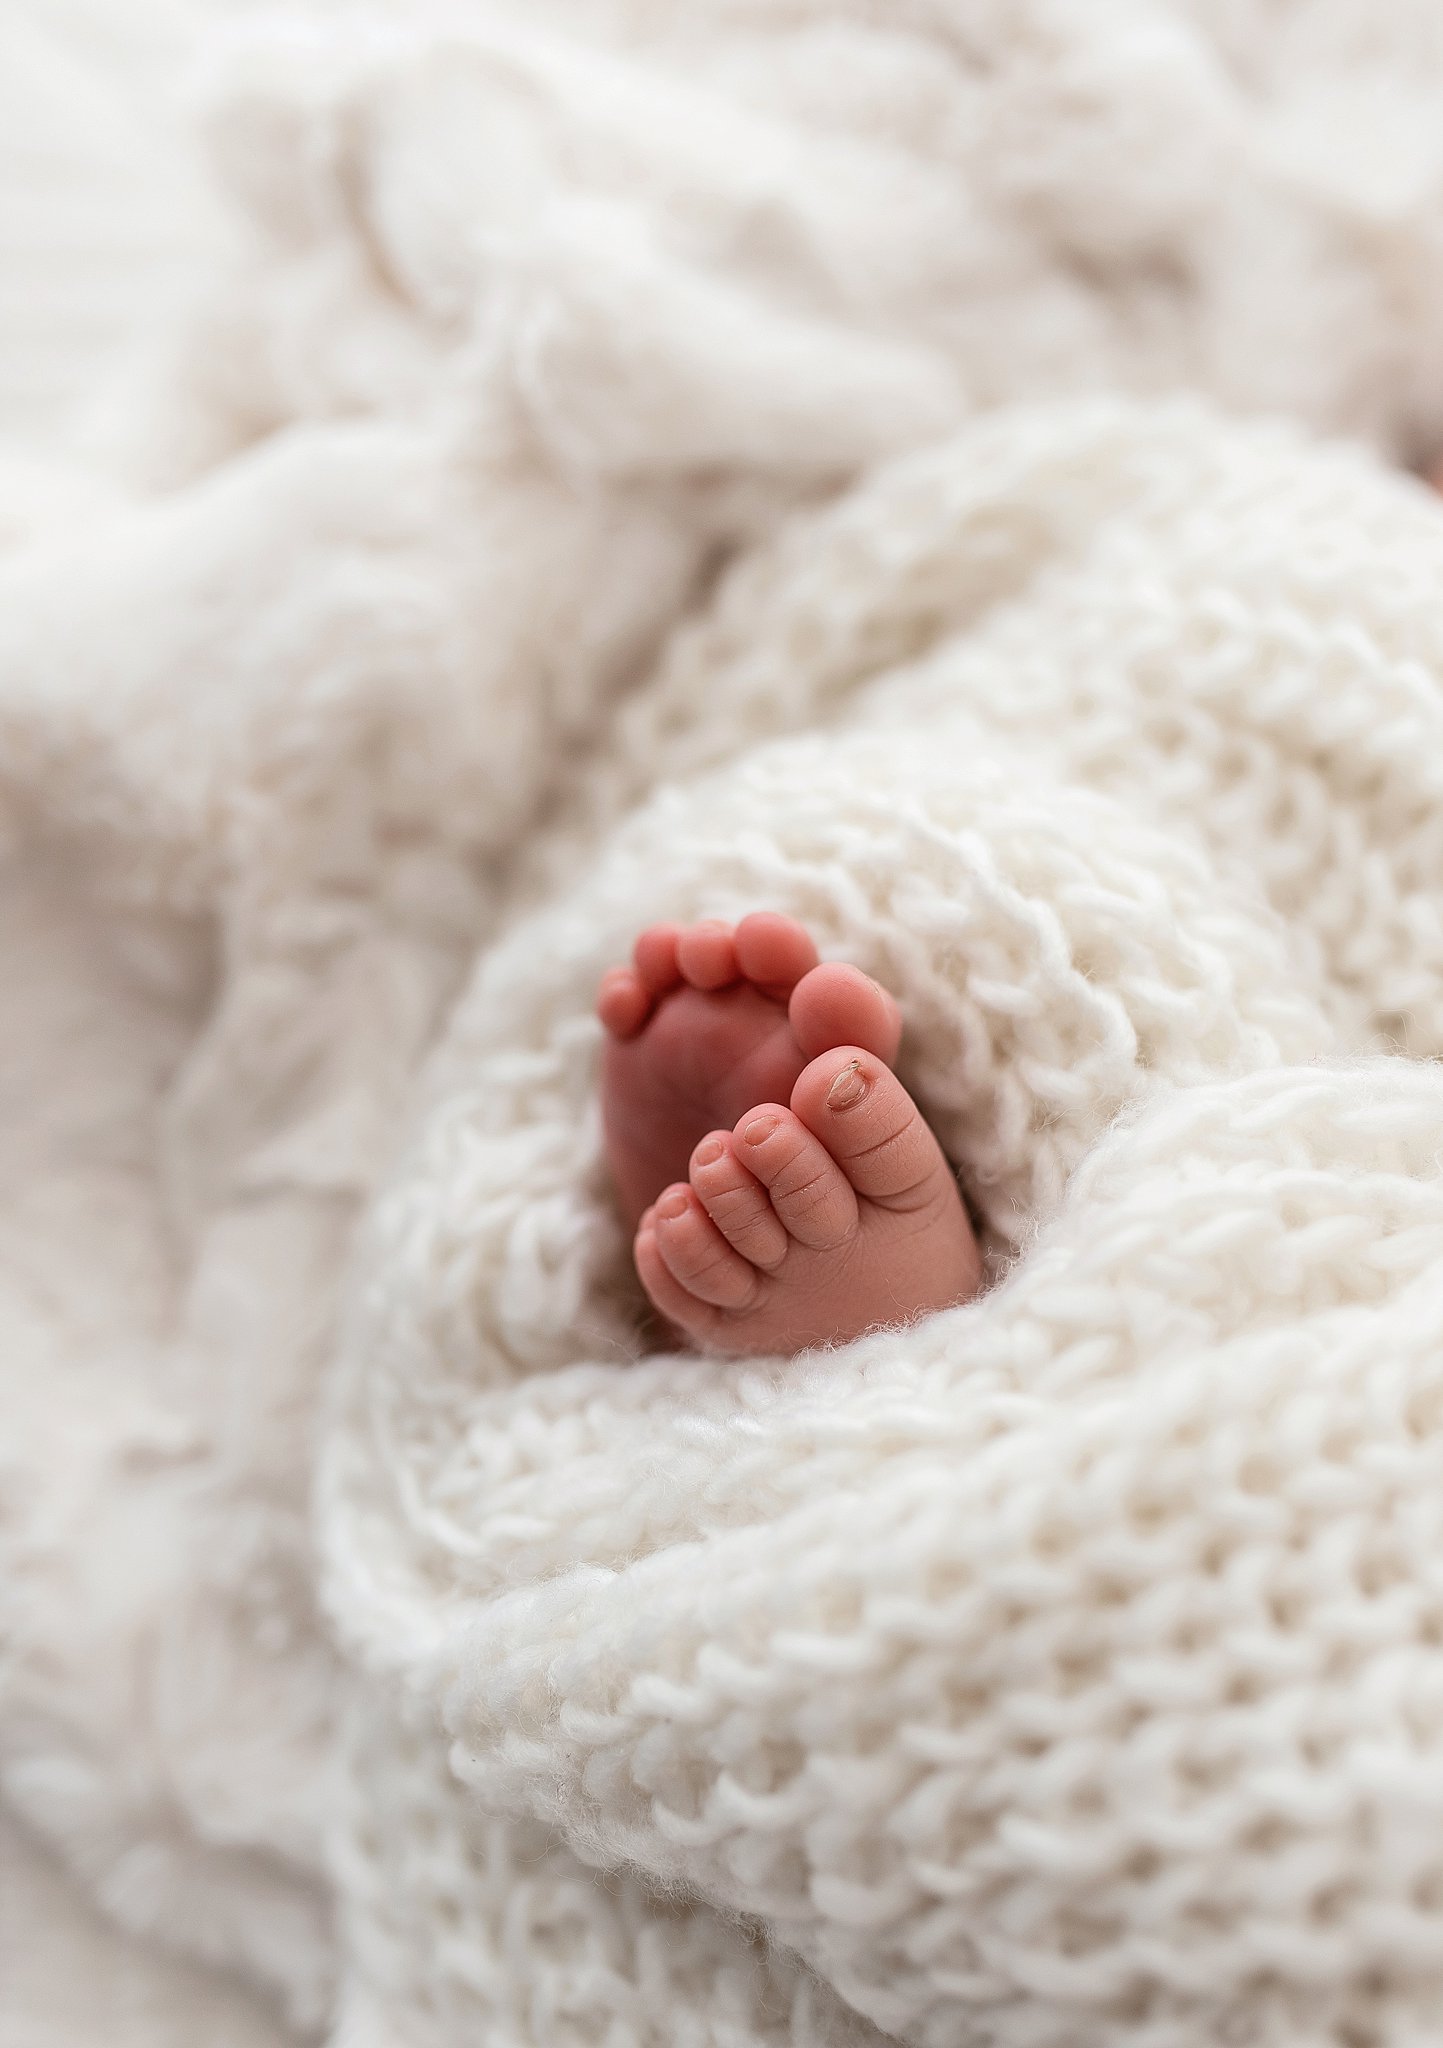 Details of a newborn baby's toes sticking out of a white knit blanket